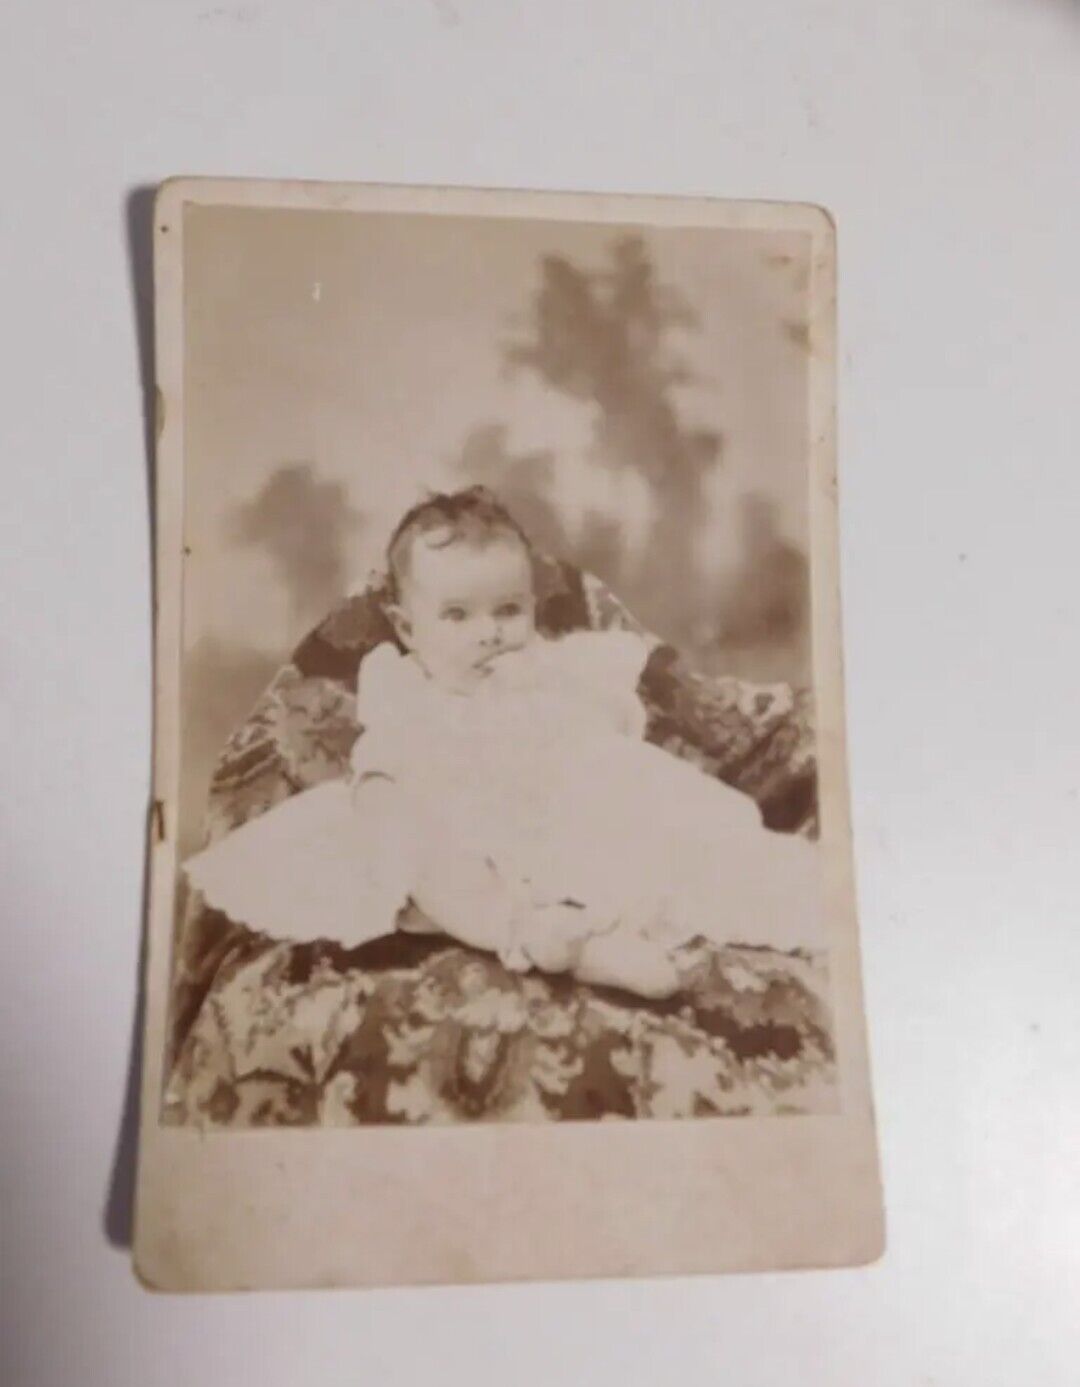 Antique 1880's Cabinet Card Photograph Adorable Sitting Baby Post Mortem?